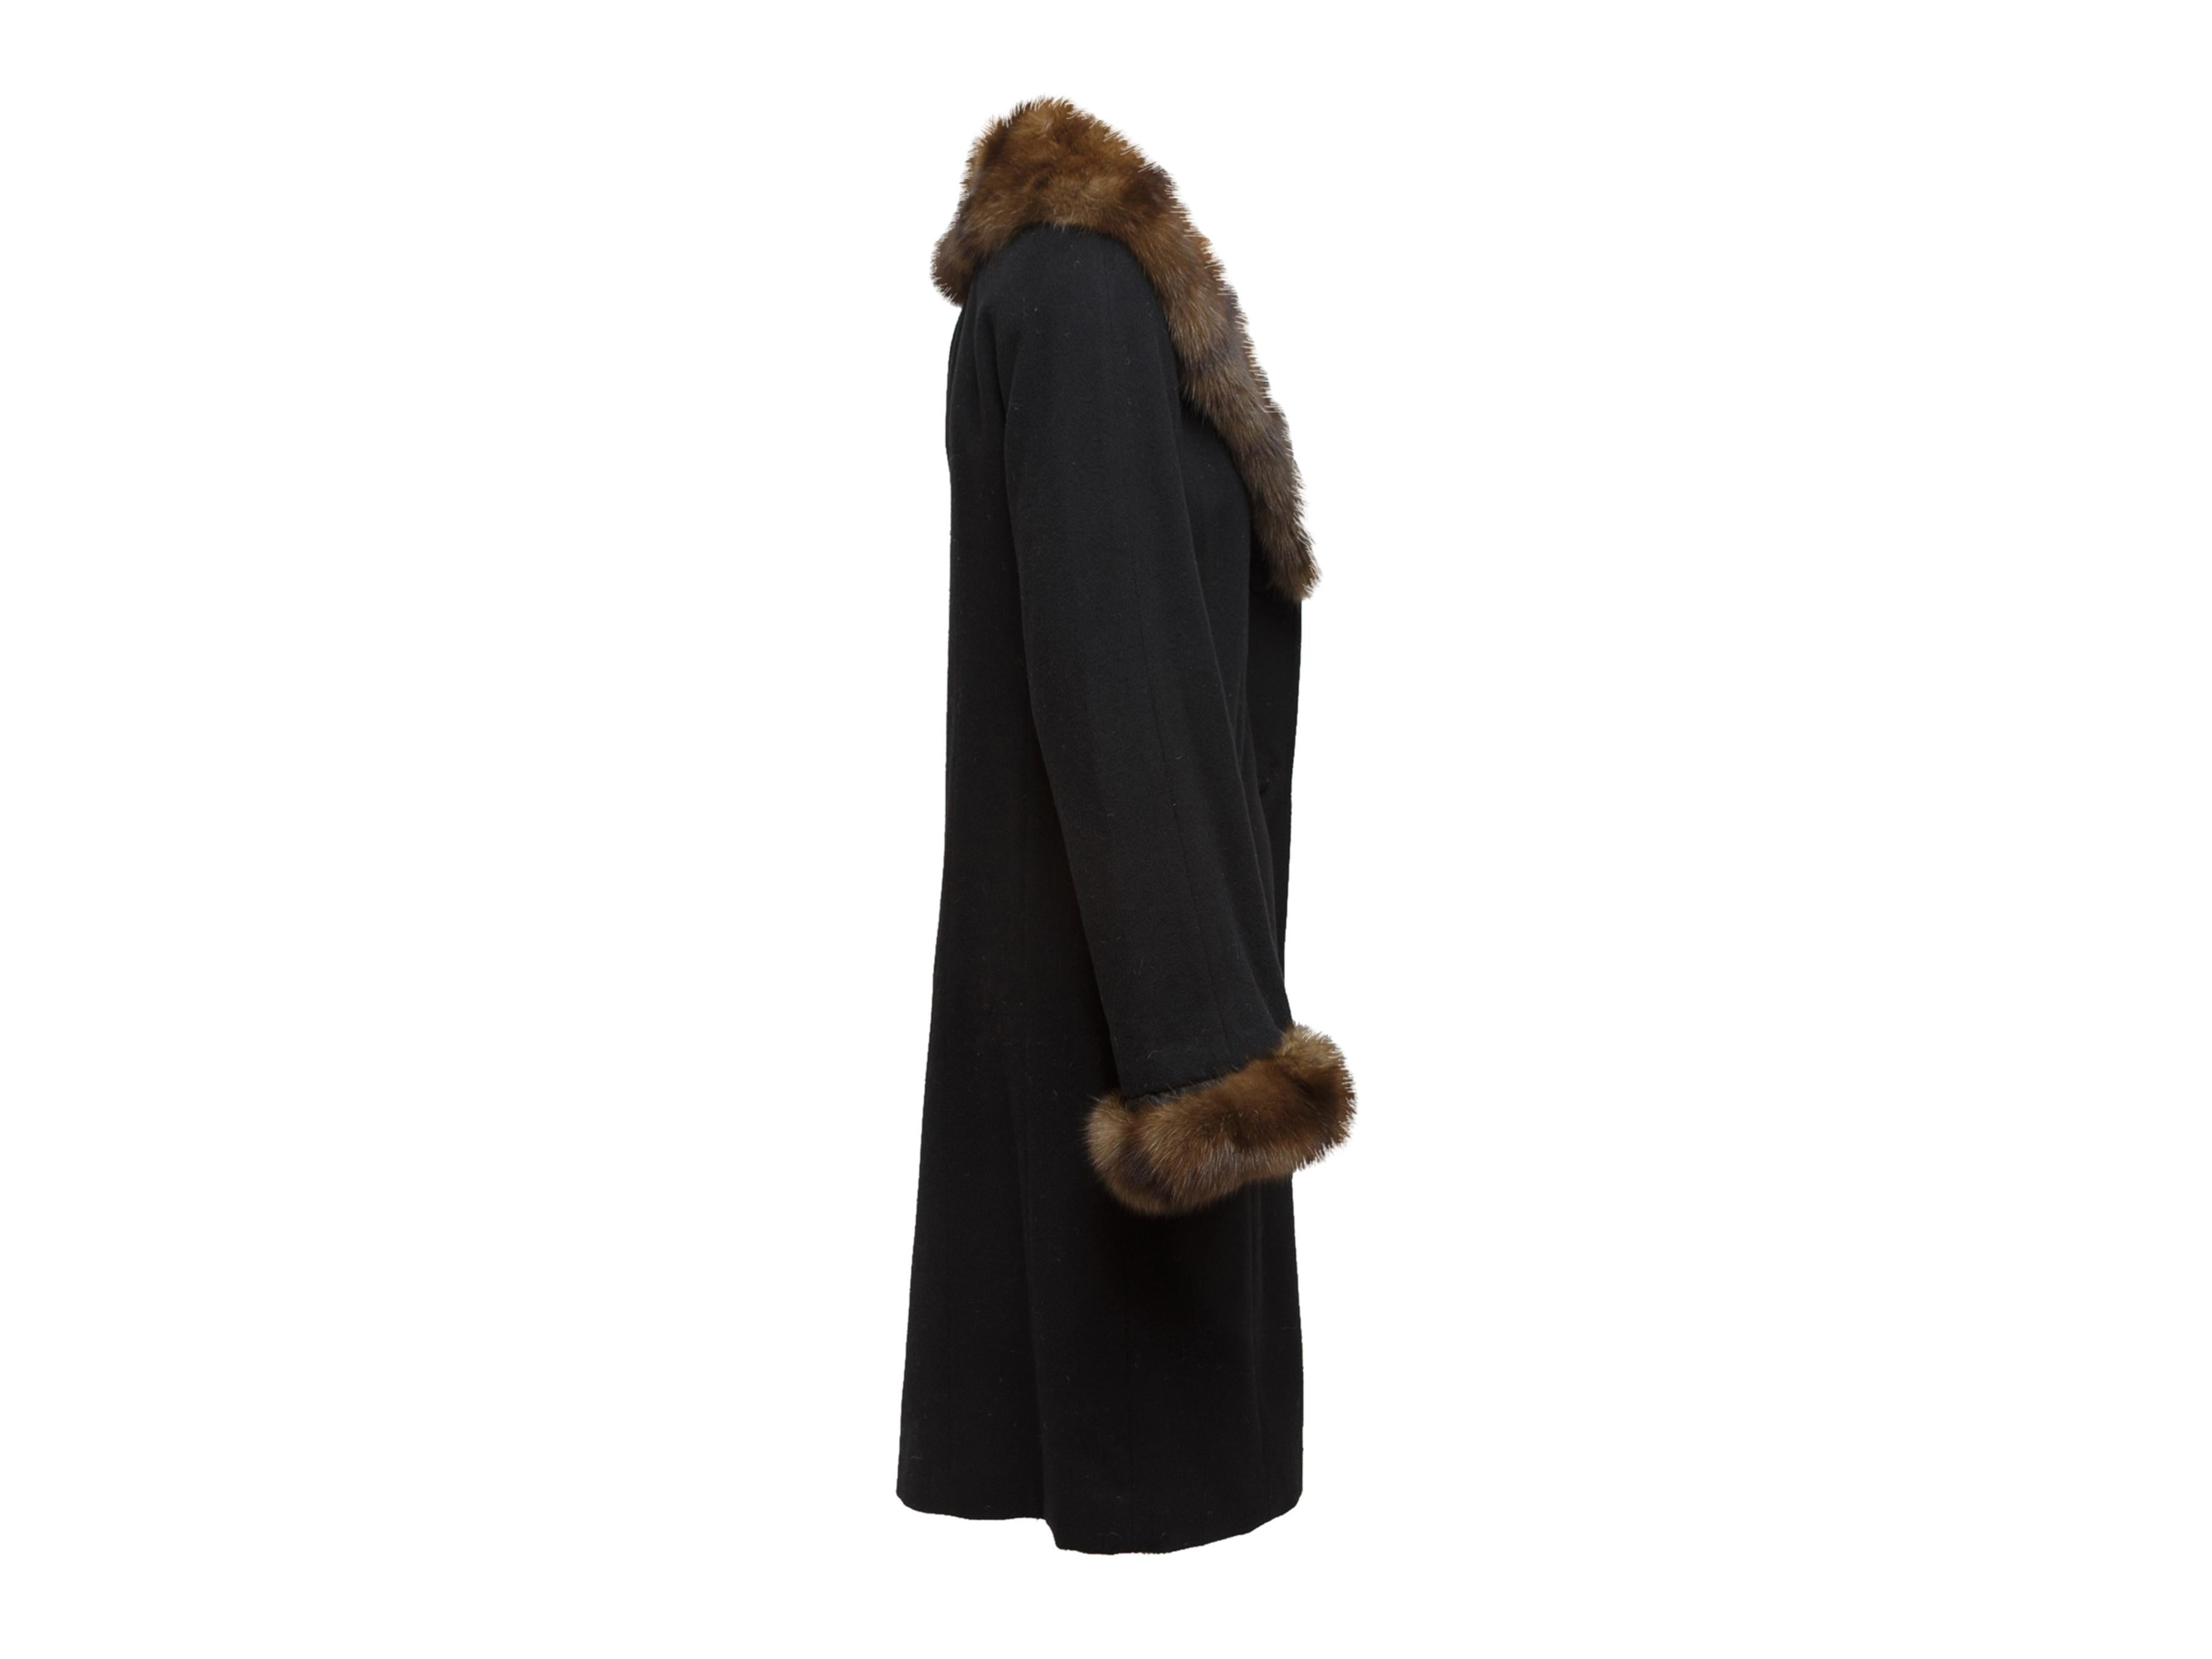 Product details: Black custom cashmere winter coat made with authentic Loro Piana material. Sable fur trim throughout. Long sleeves. Dual pockets at hips. Button closures at center front. 36